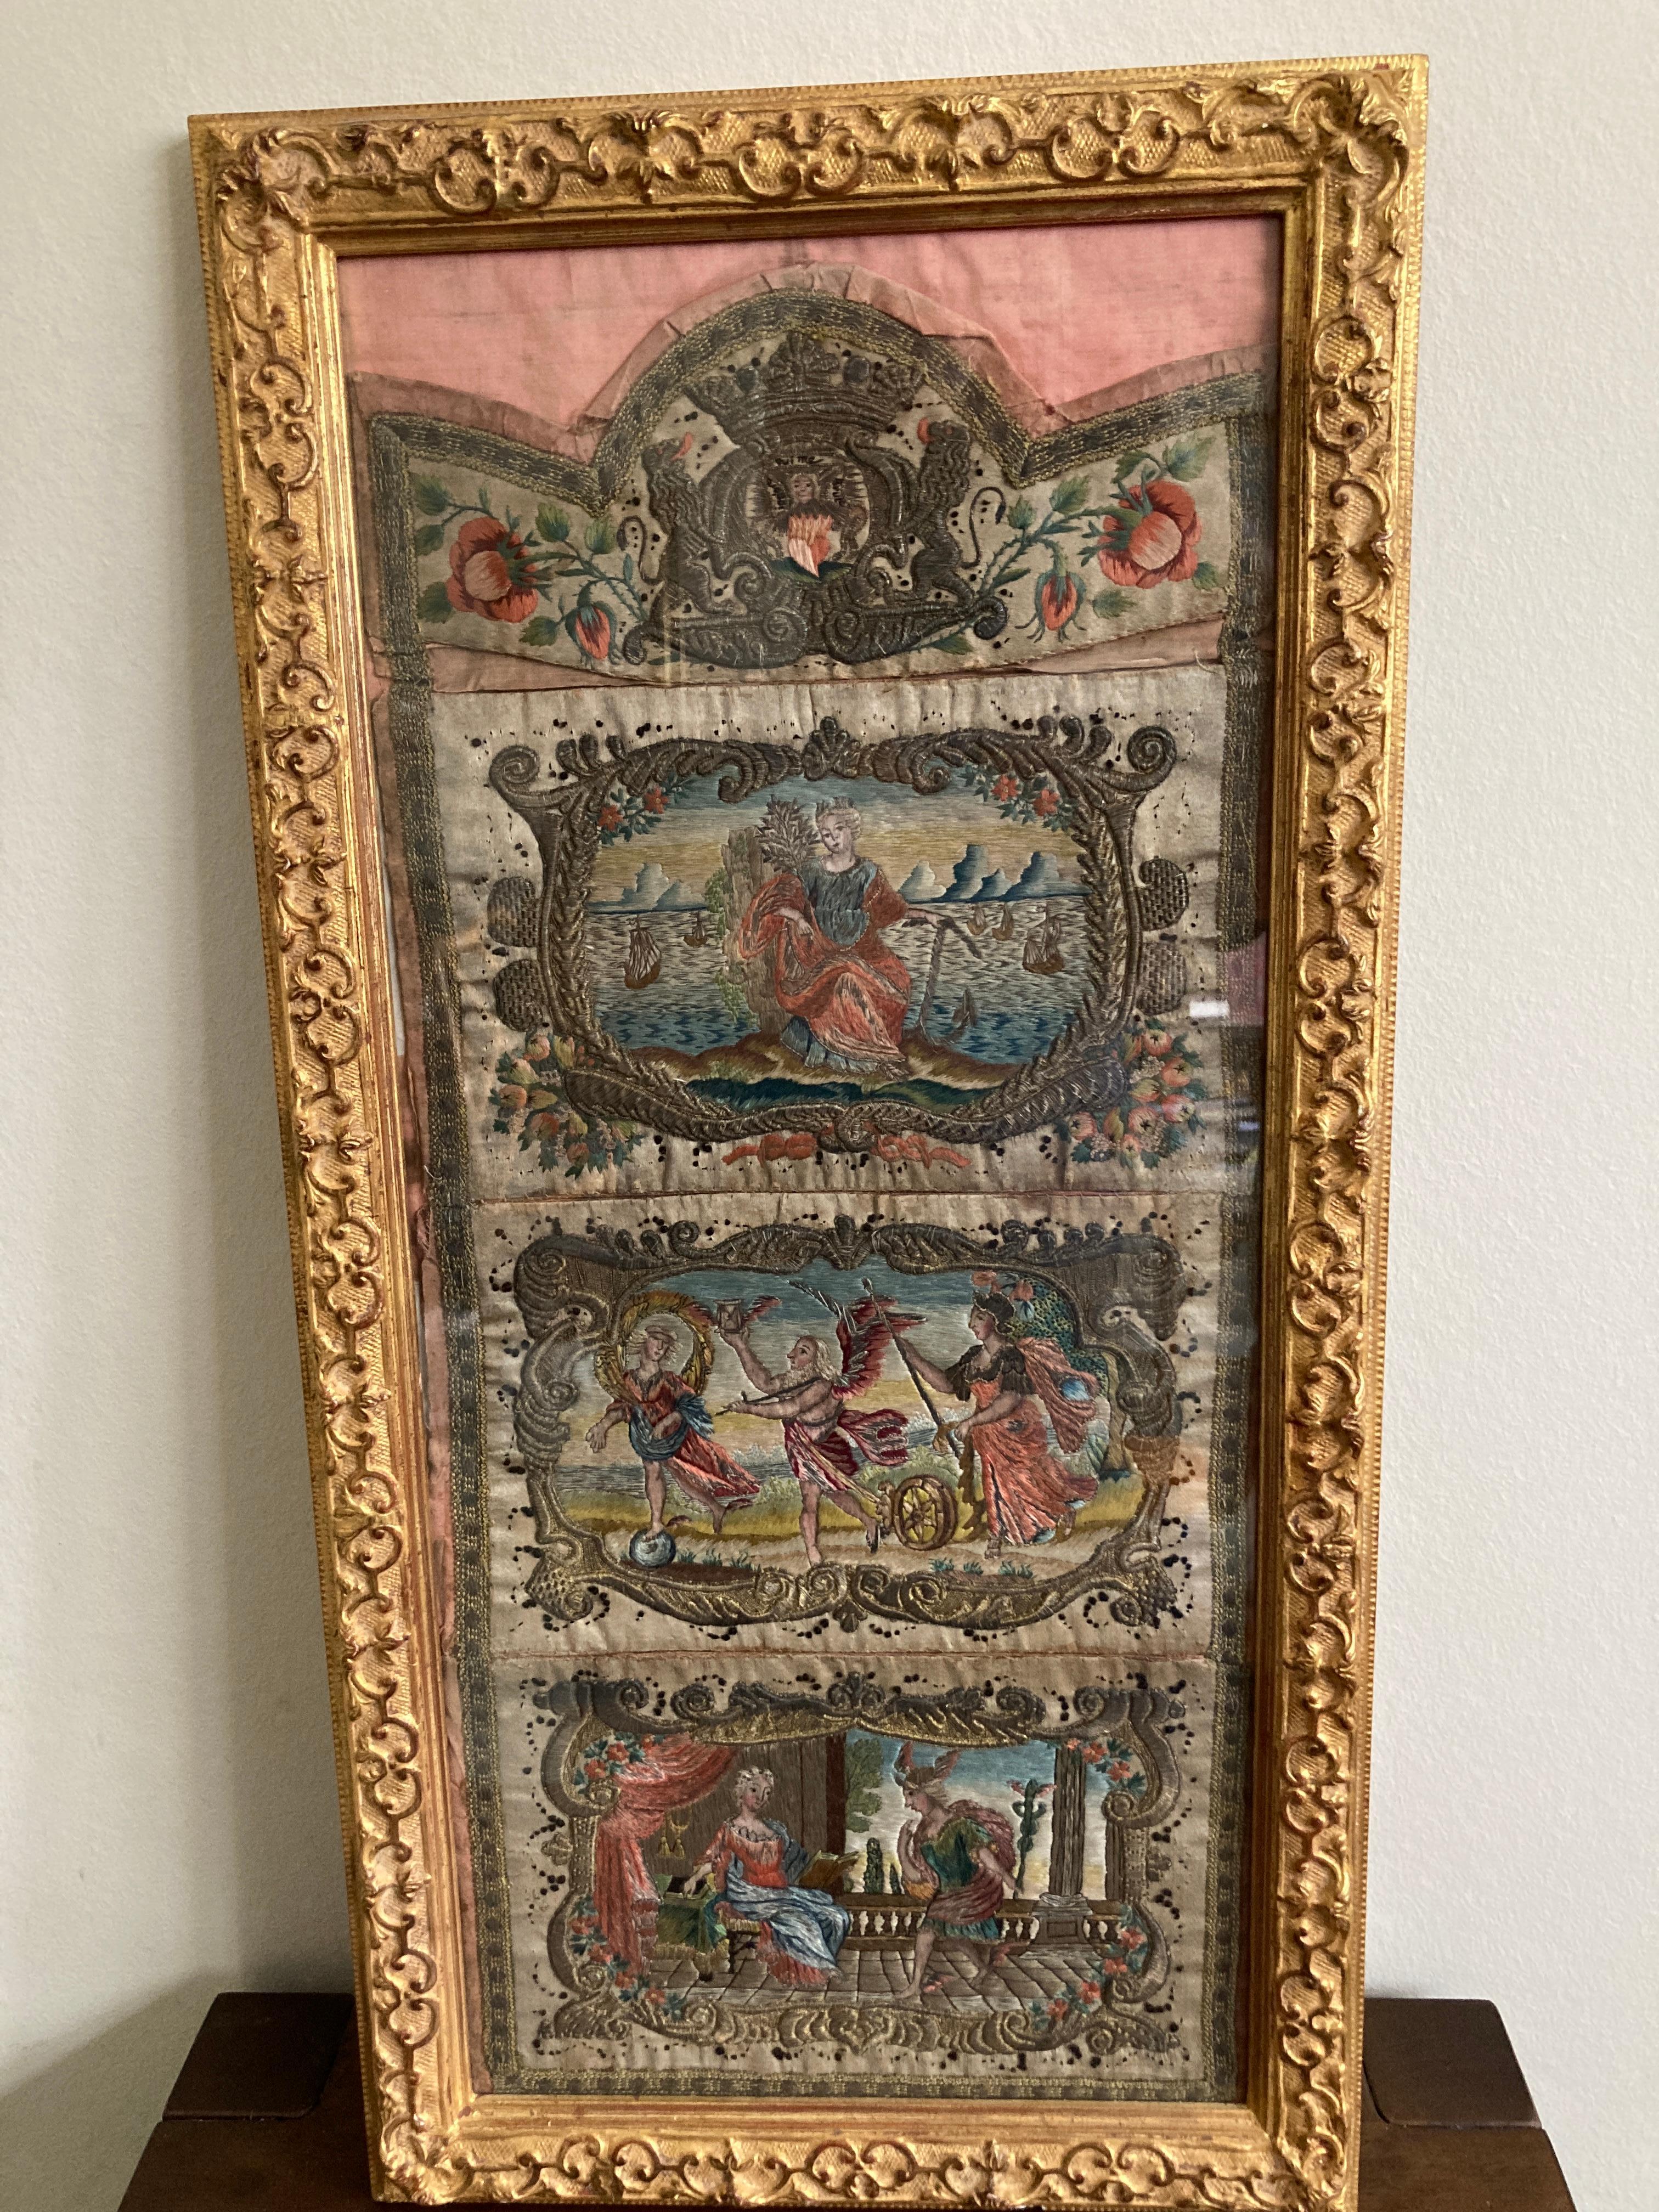 An antique Silk and Metal thread embroidery.

Three 18th century figural vignettes surmounted by an armorial device, all in coloured silks and with metal thread borders. The somewhat heavy C- and S-scrolls in metal thread, seem typical of ornamental